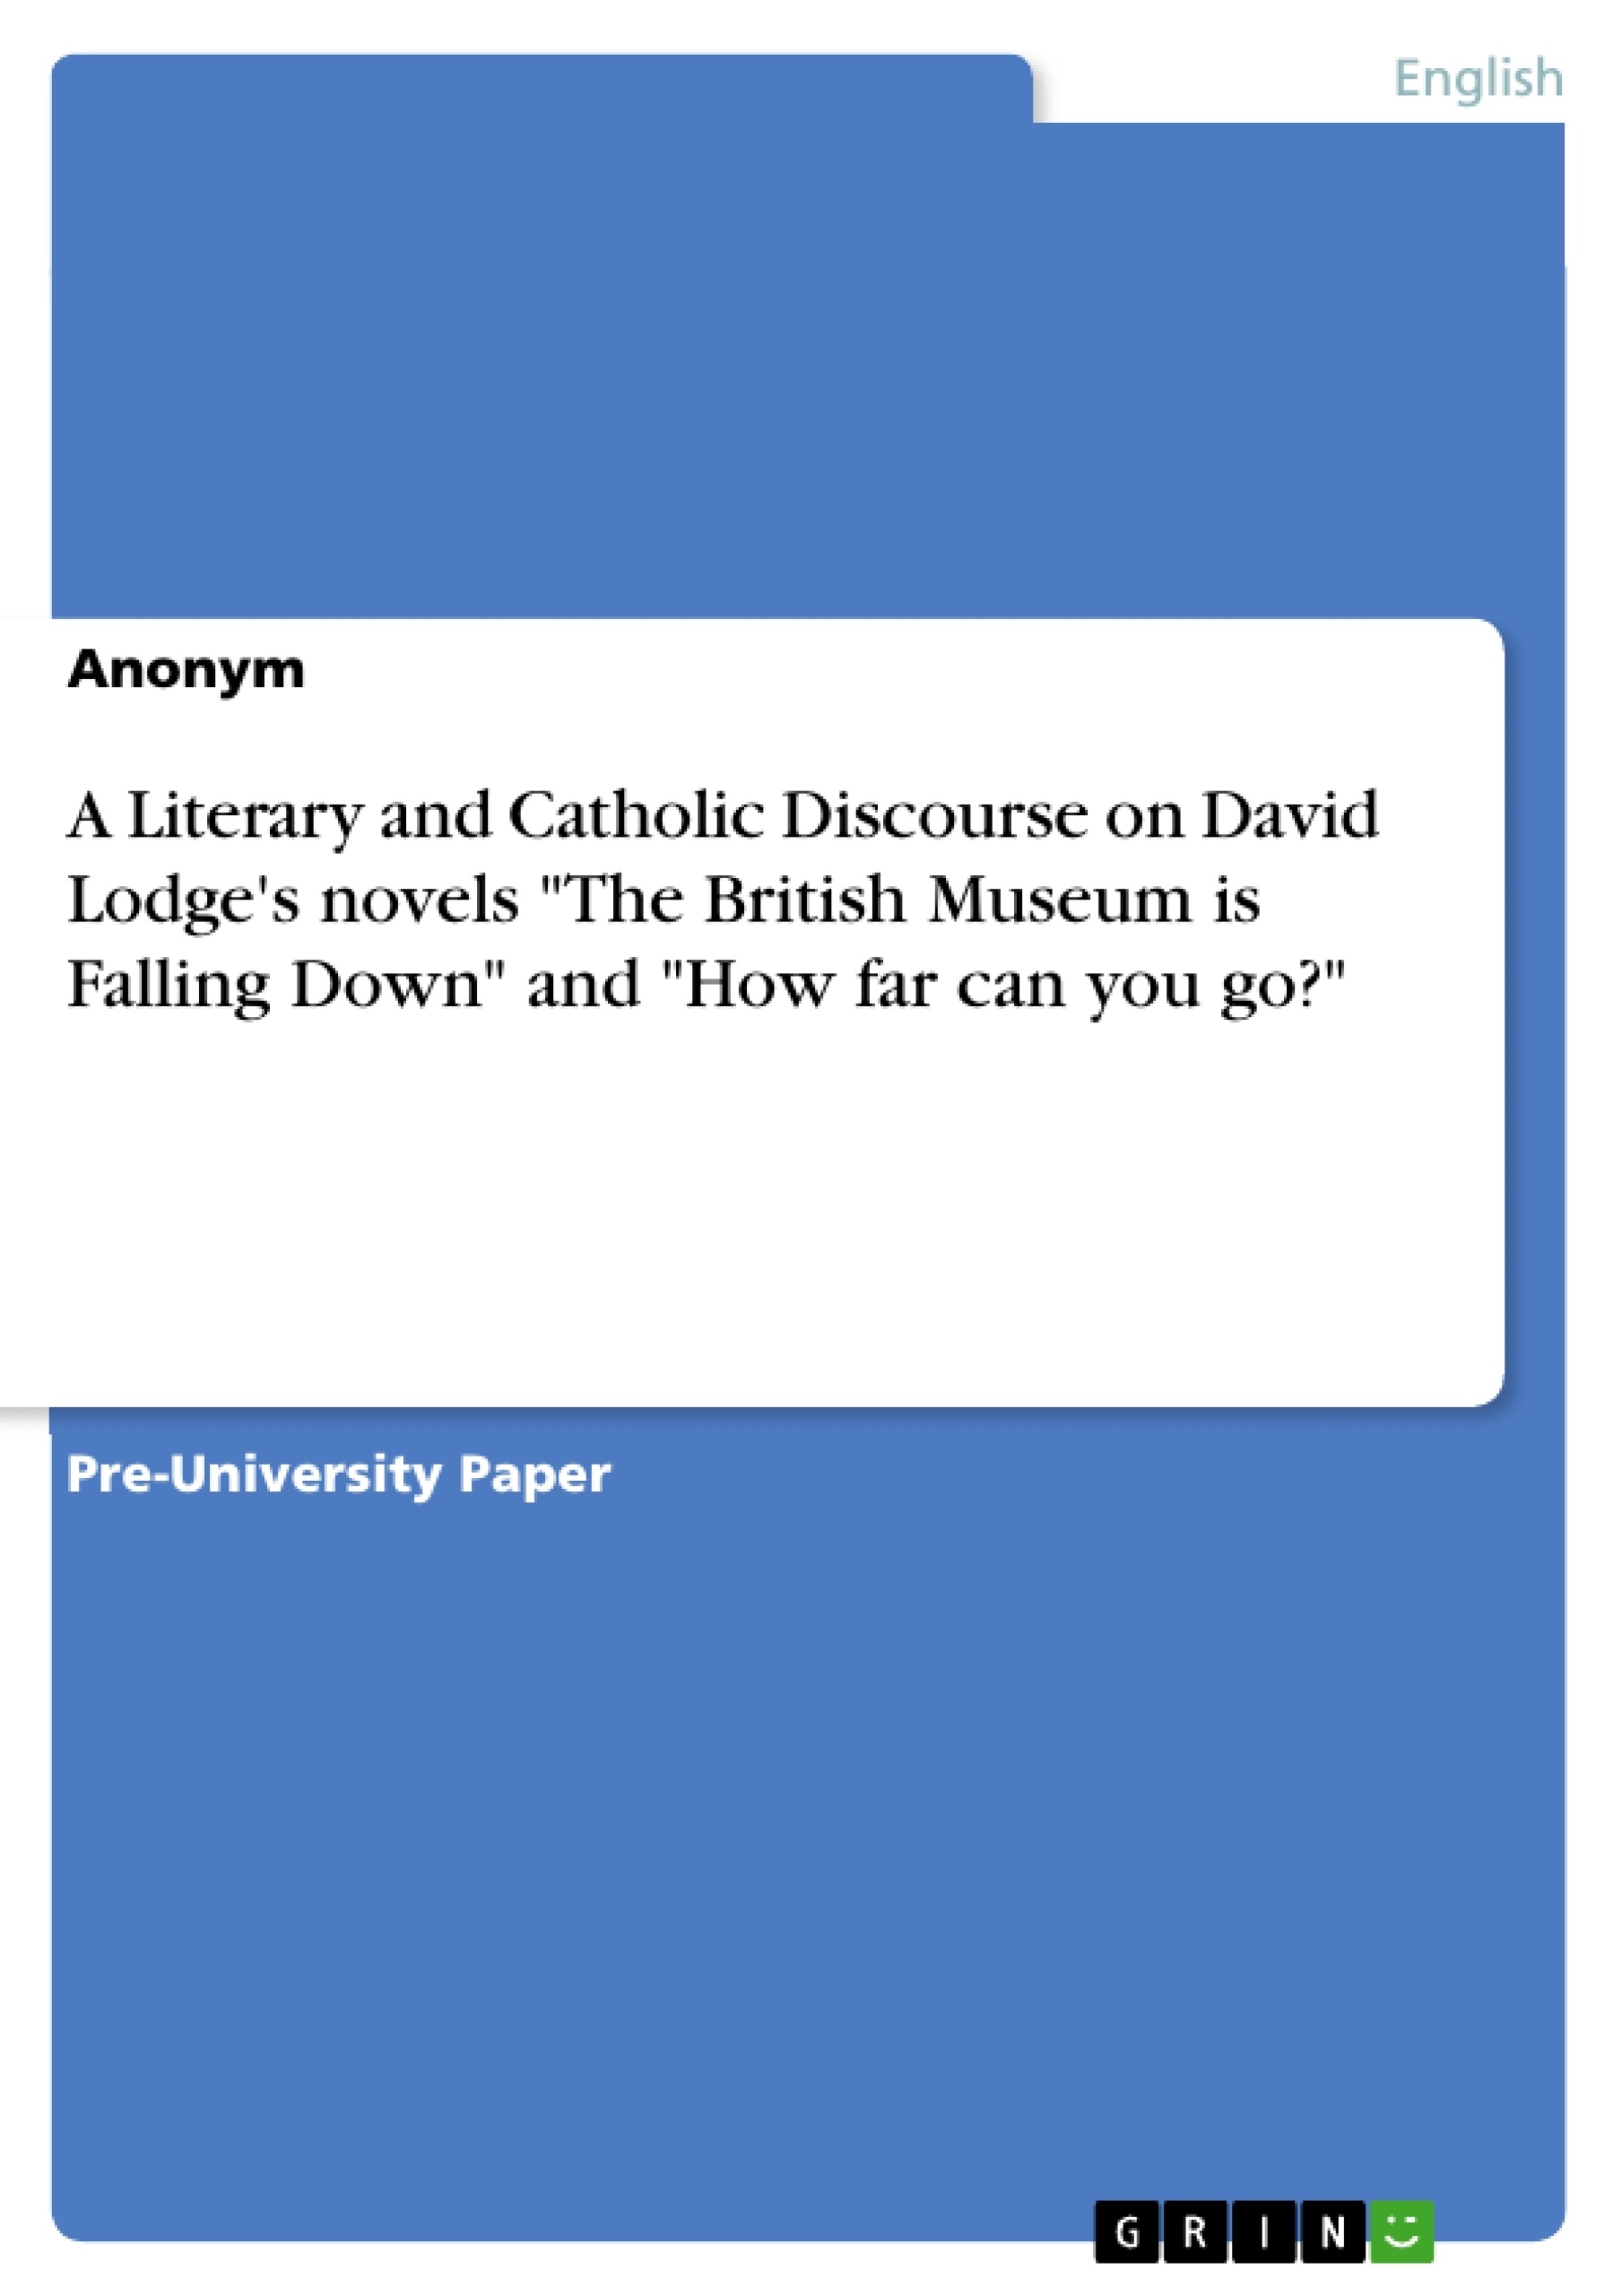 Titel: A Literary and Catholic Discourse on David Lodge's novels "The British Museum is Falling Down" and "How far can you go?"